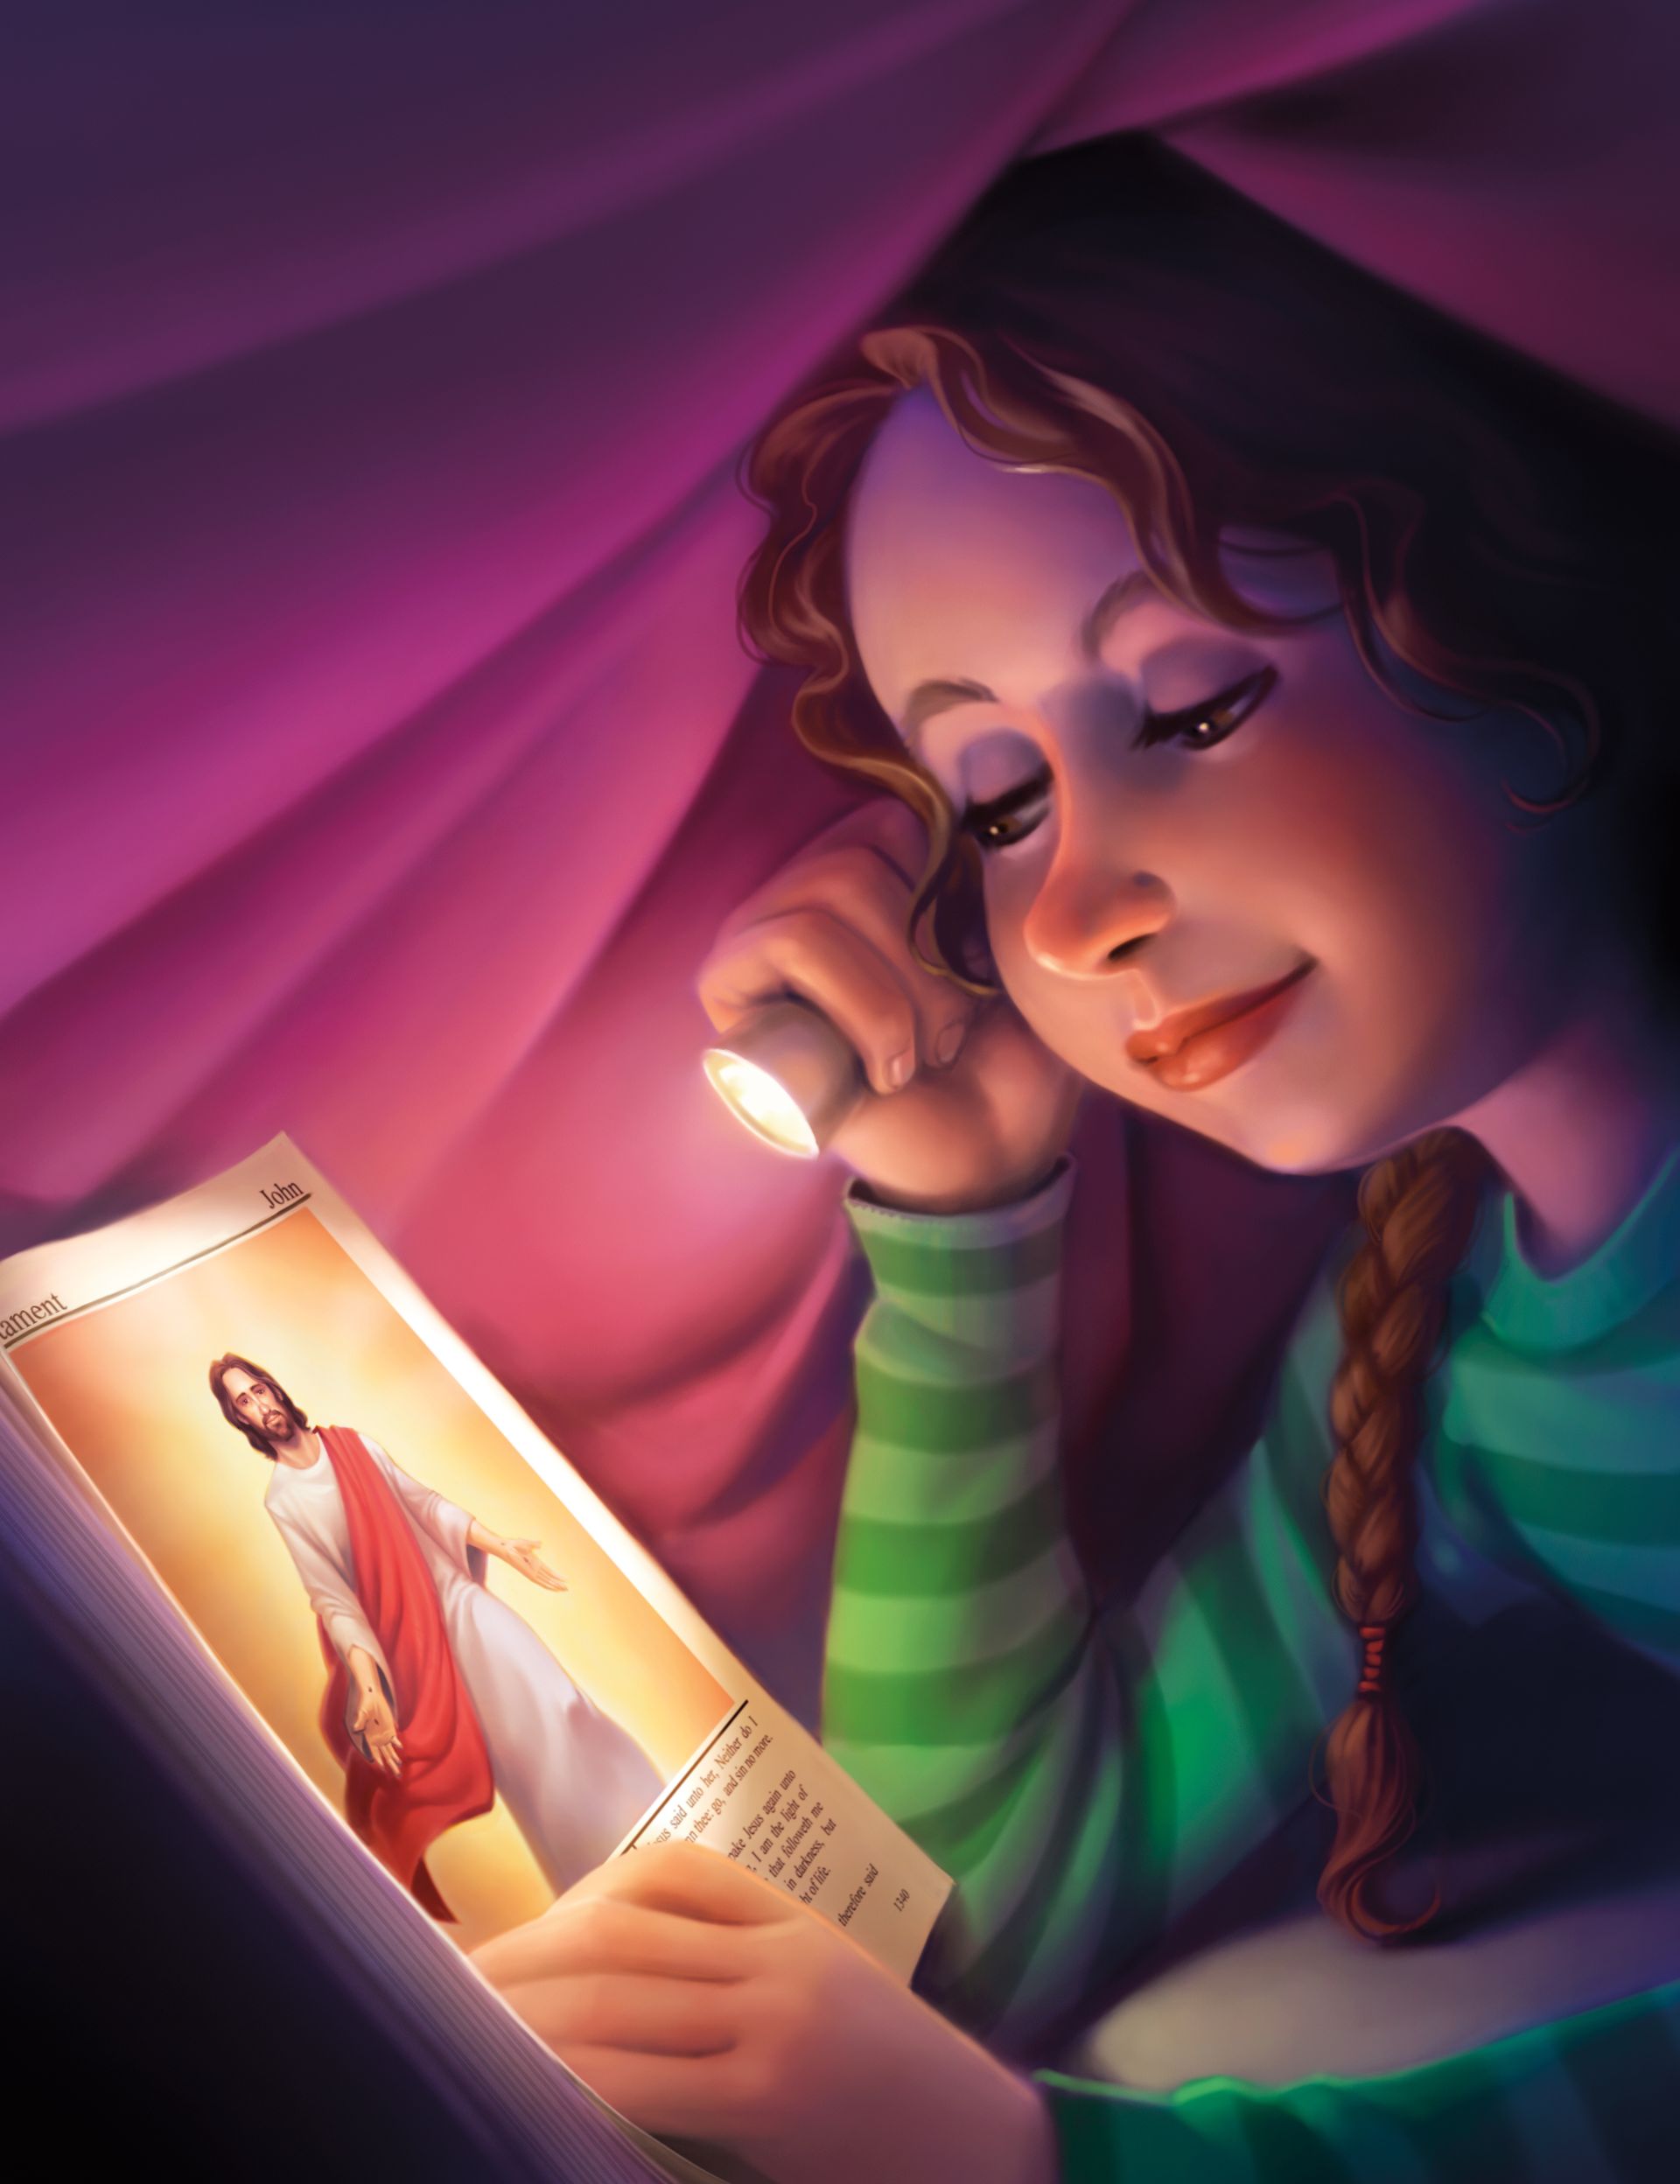 A girl lying under a blanket, holding a flashlight while reading a book with pictures of Christ.